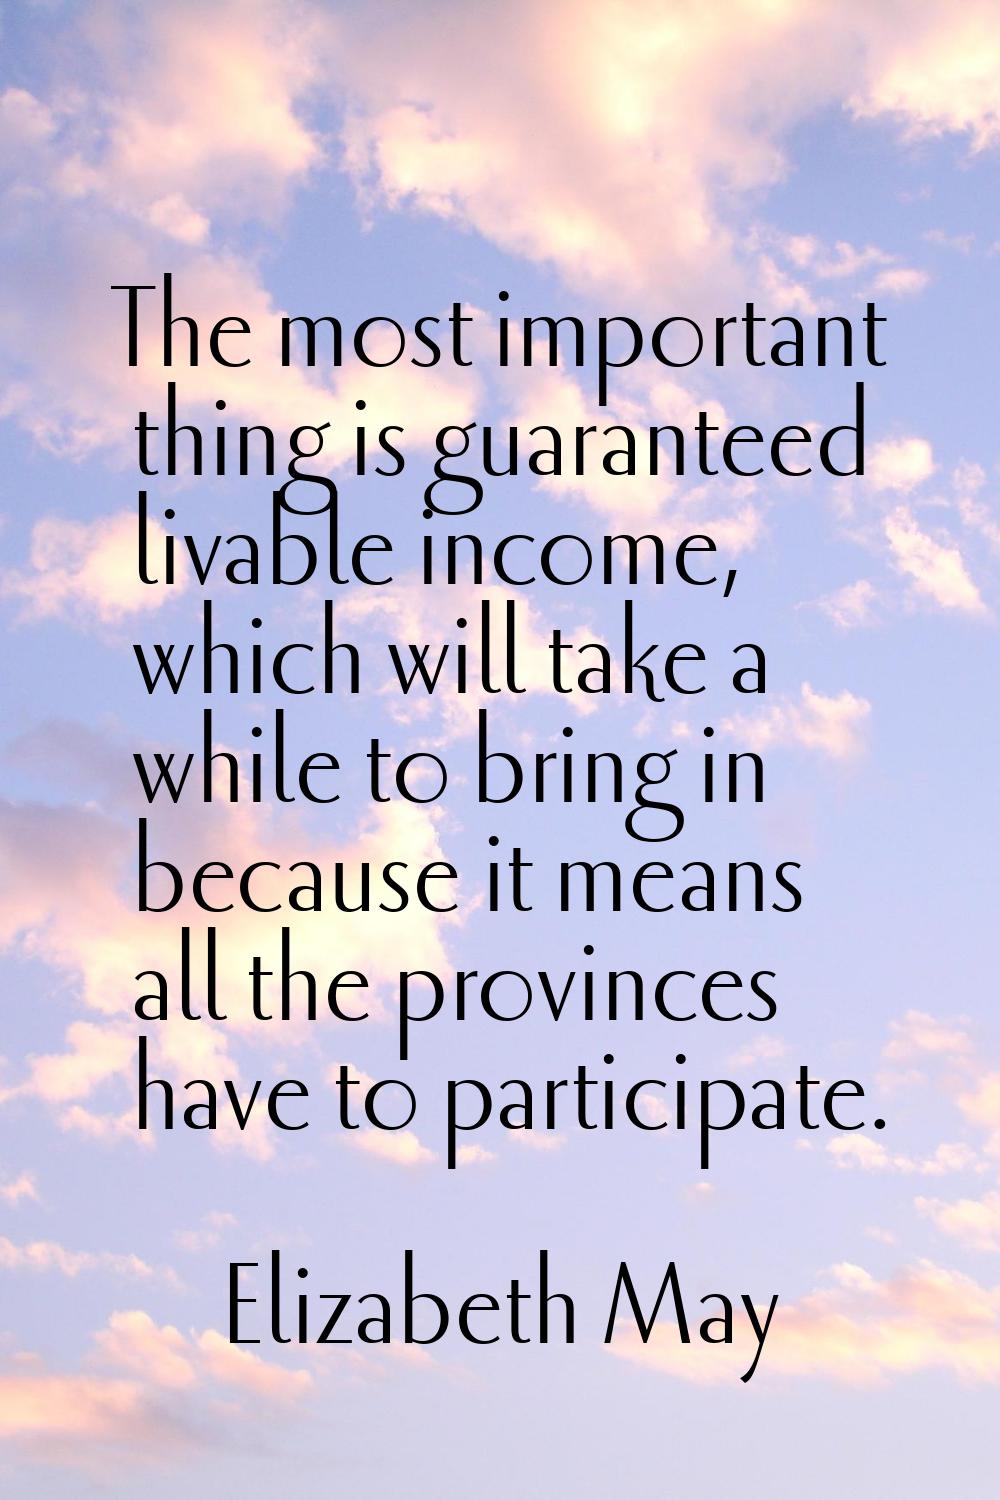 The most important thing is guaranteed livable income, which will take a while to bring in because 